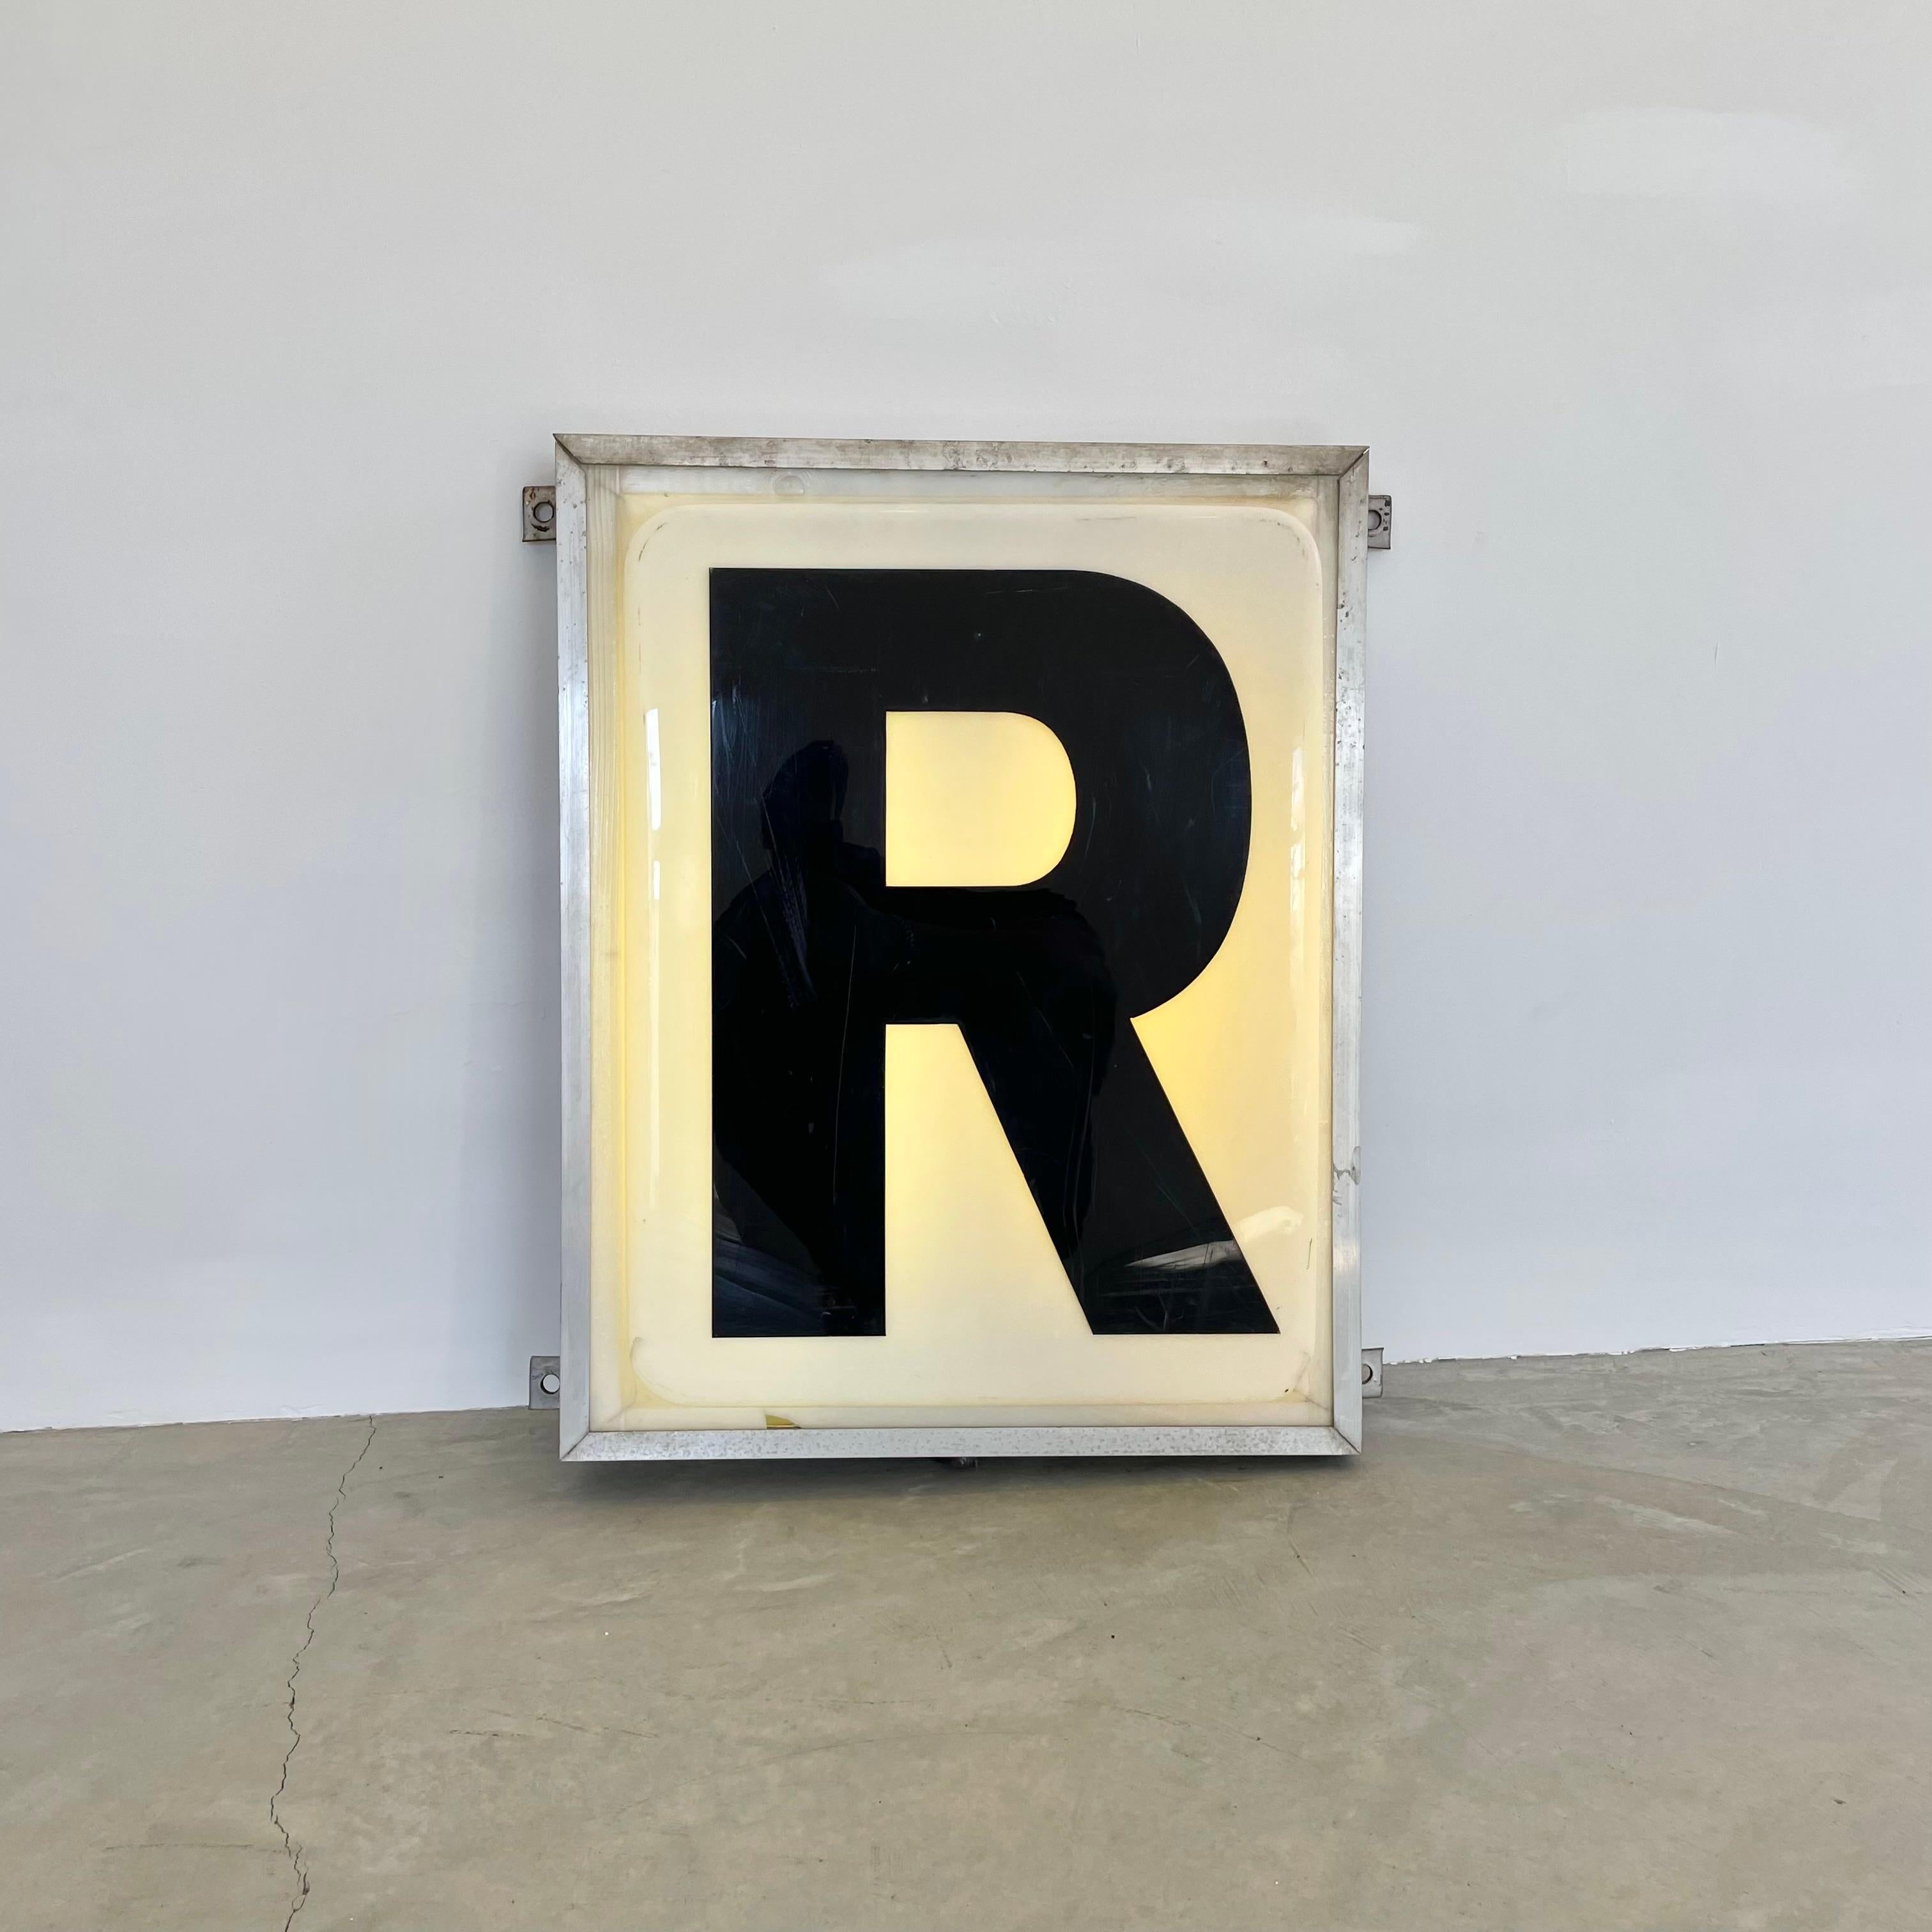 Large industrial illuminating electric letter ‘R’ sign from a Northwestern United States Emergency Room. 2 feet wide and 2.5 feet tall. Letter 'E' also available in a separate listing. Sticker on the bottom reads ‘Underwriters’ Laboratories, inc’ -